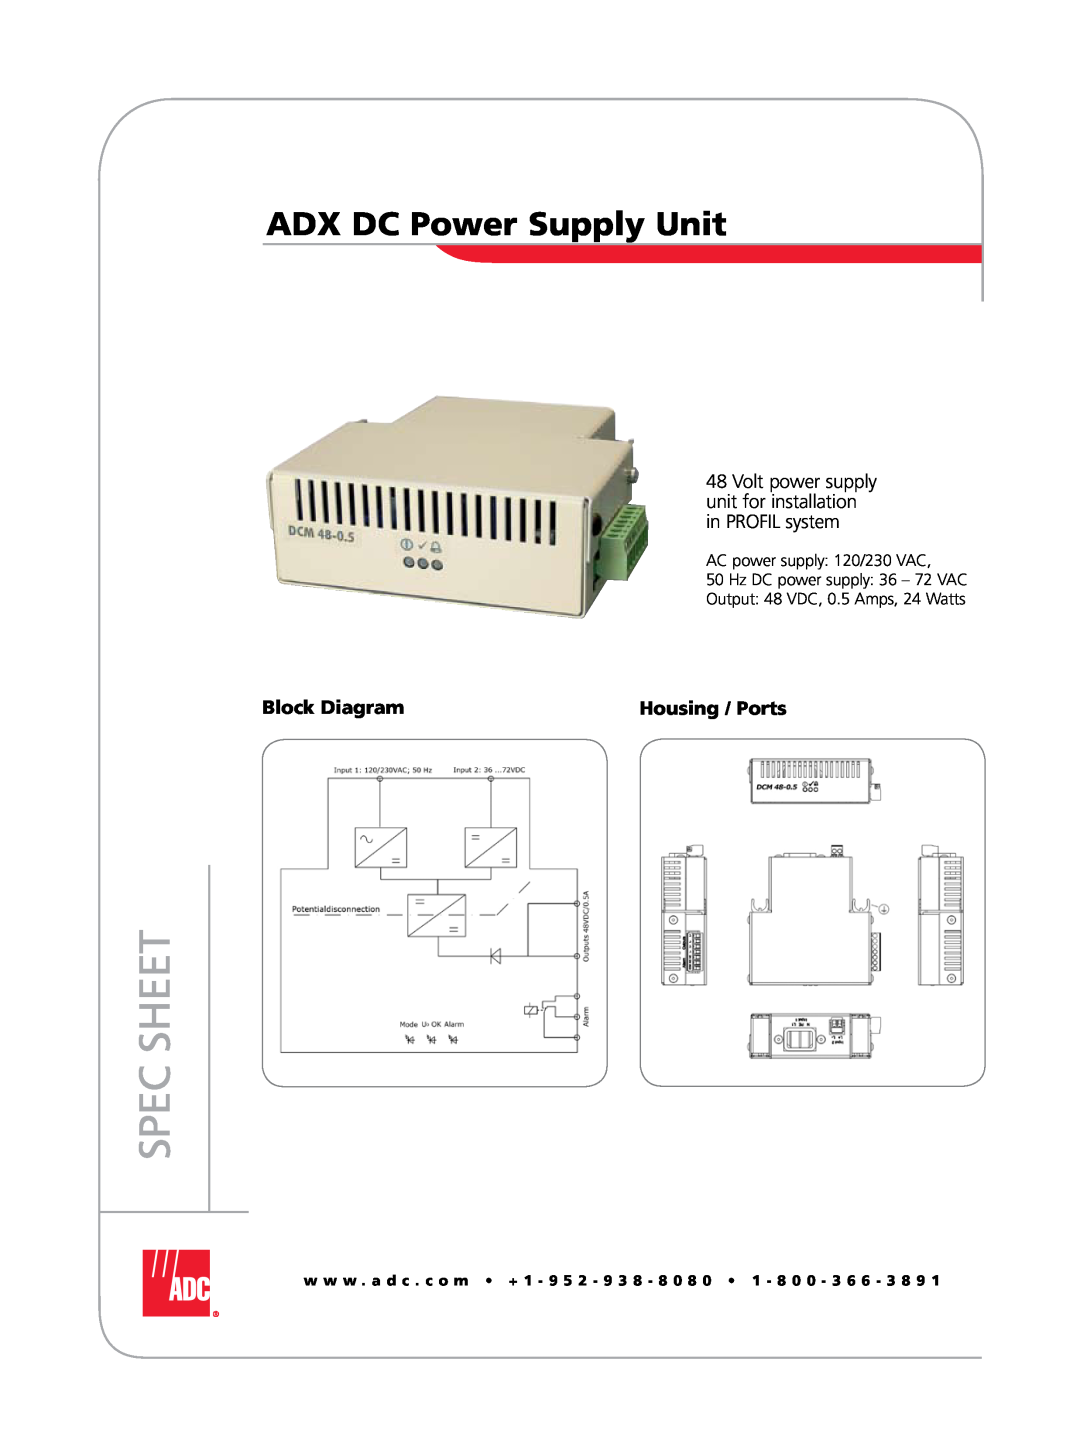 ADC manual Volt power supply unit for installation in PROFIL system, Spec Sheet, ADX DC Power Supply Unit 